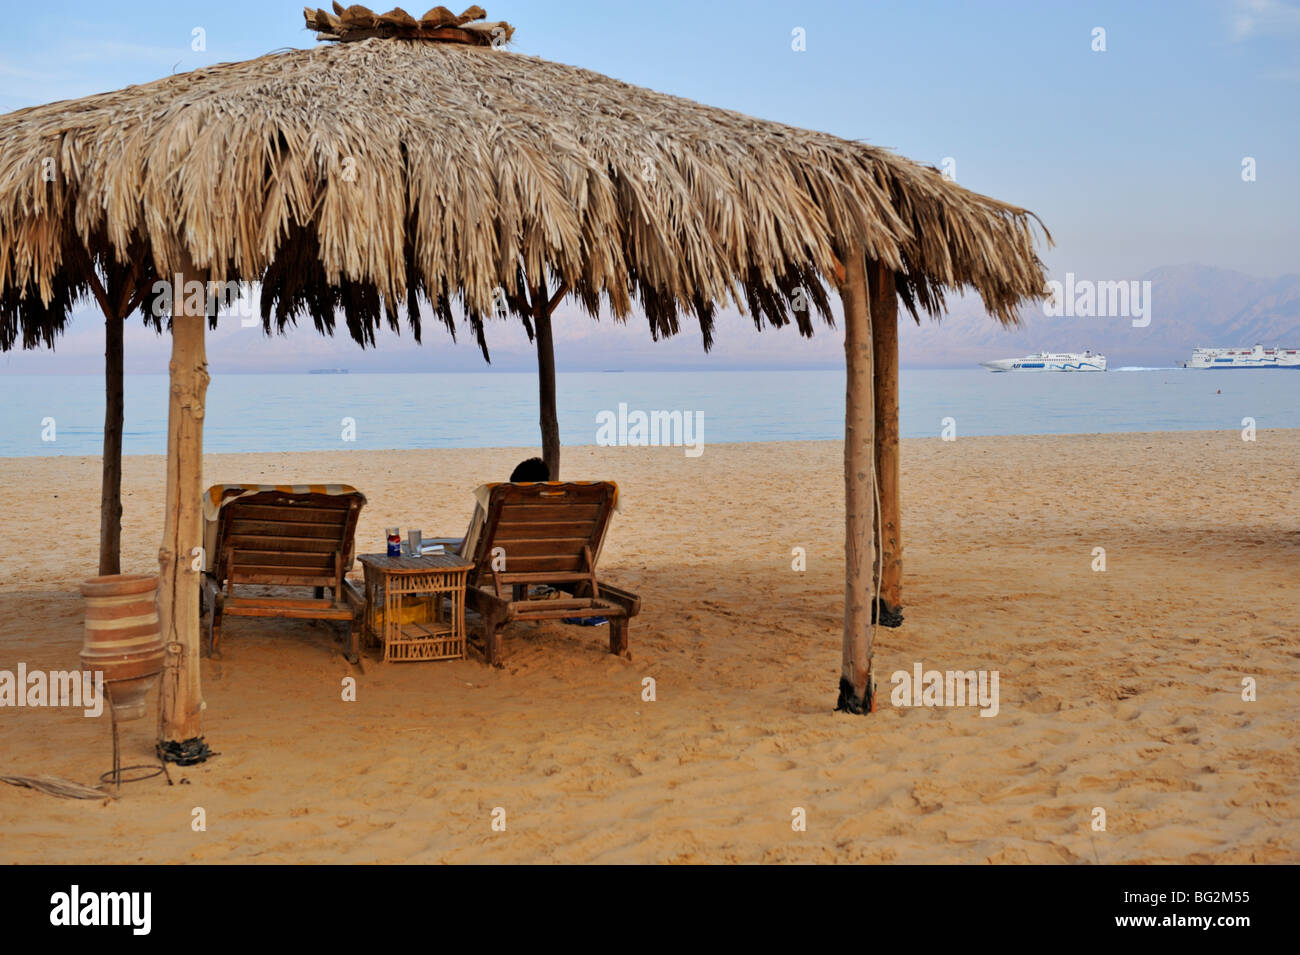 Relaxation on beach by sea under thatched sunshade, Nuweiba, 'Red Sea', Sinai, Egypt Stock Photo